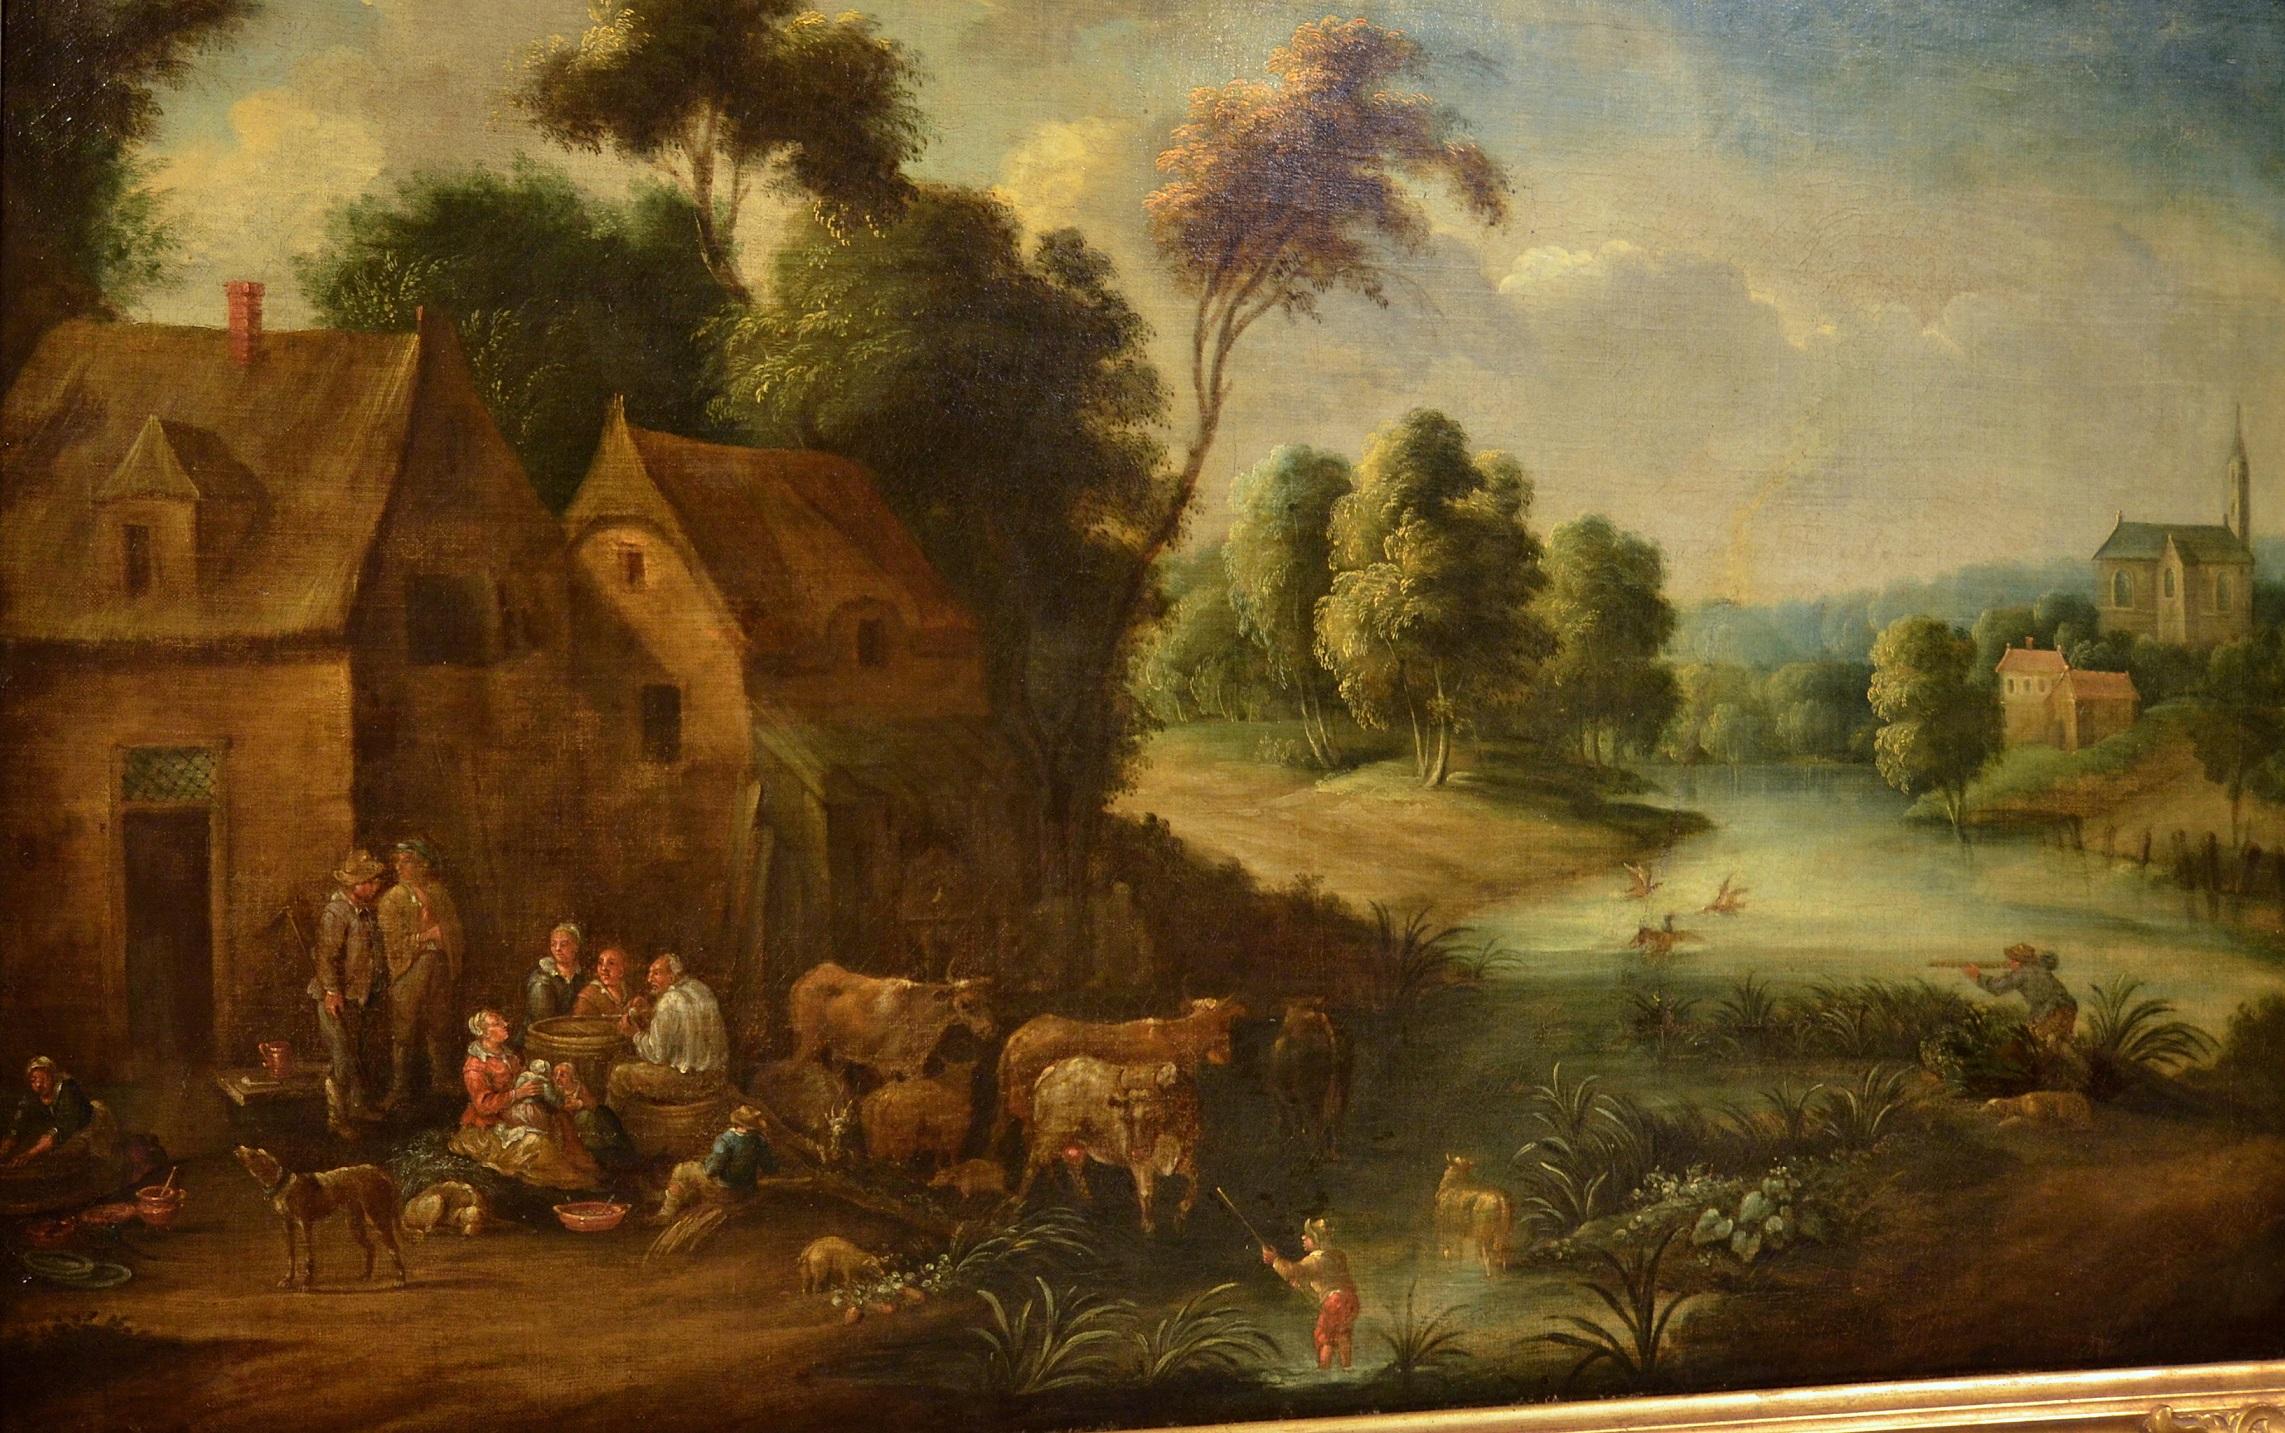 River Landscape Village Paint oil on canvas 17th Century  - Old Masters Painting by Unknown